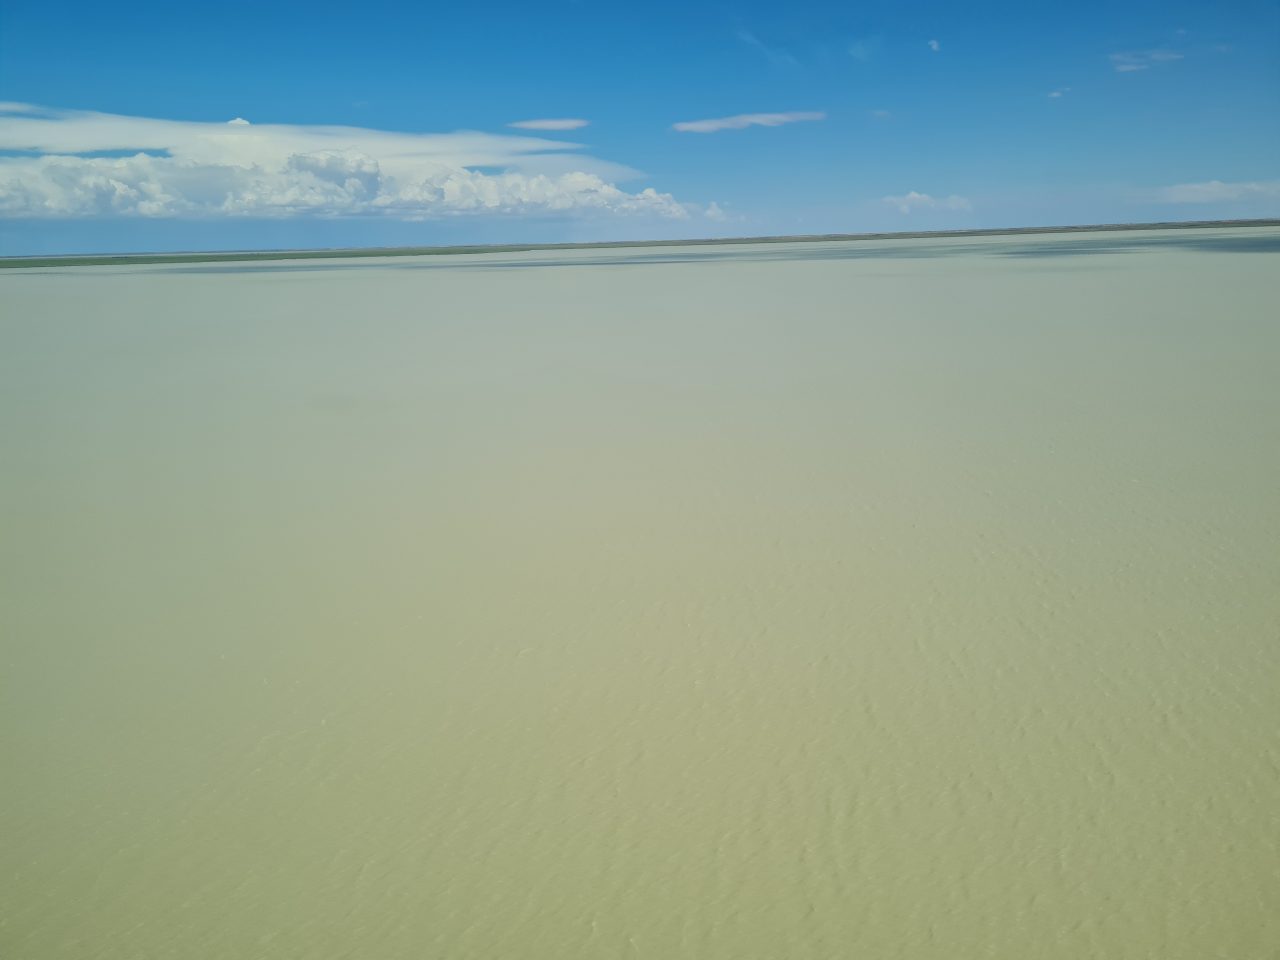 Aerial photo of large lake, beige water surface covering most of image  with a small band of land at the horizon. Sky is blue and clouds are high, white but building up.